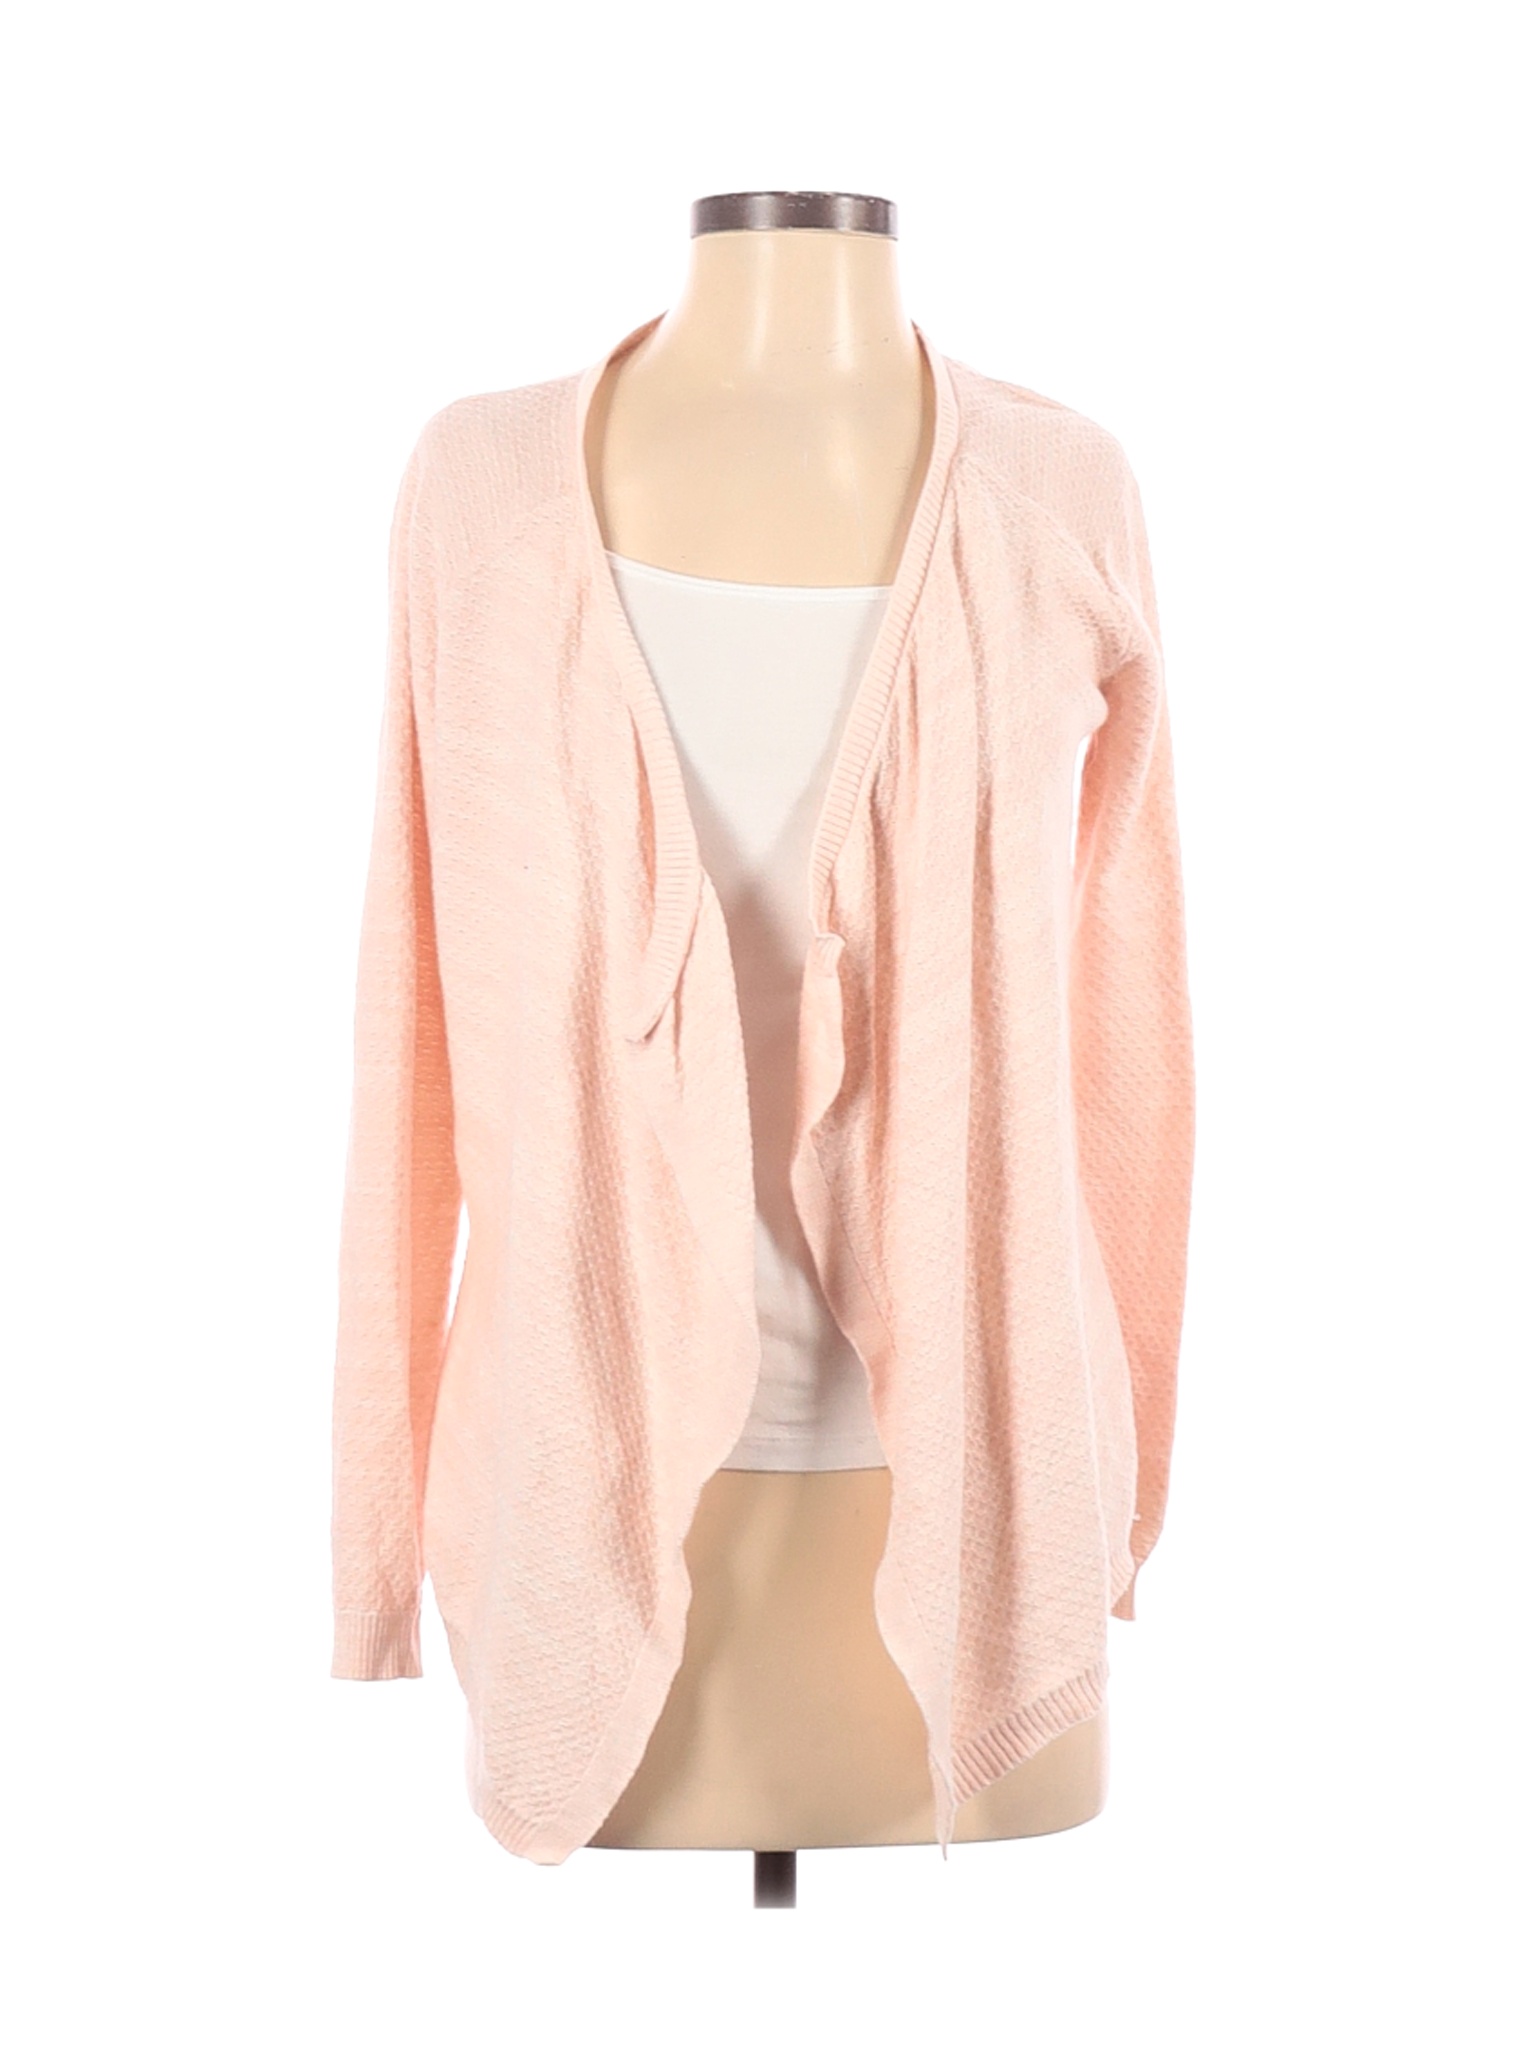 The Limited Outlet Women Pink Cardigan S | eBay